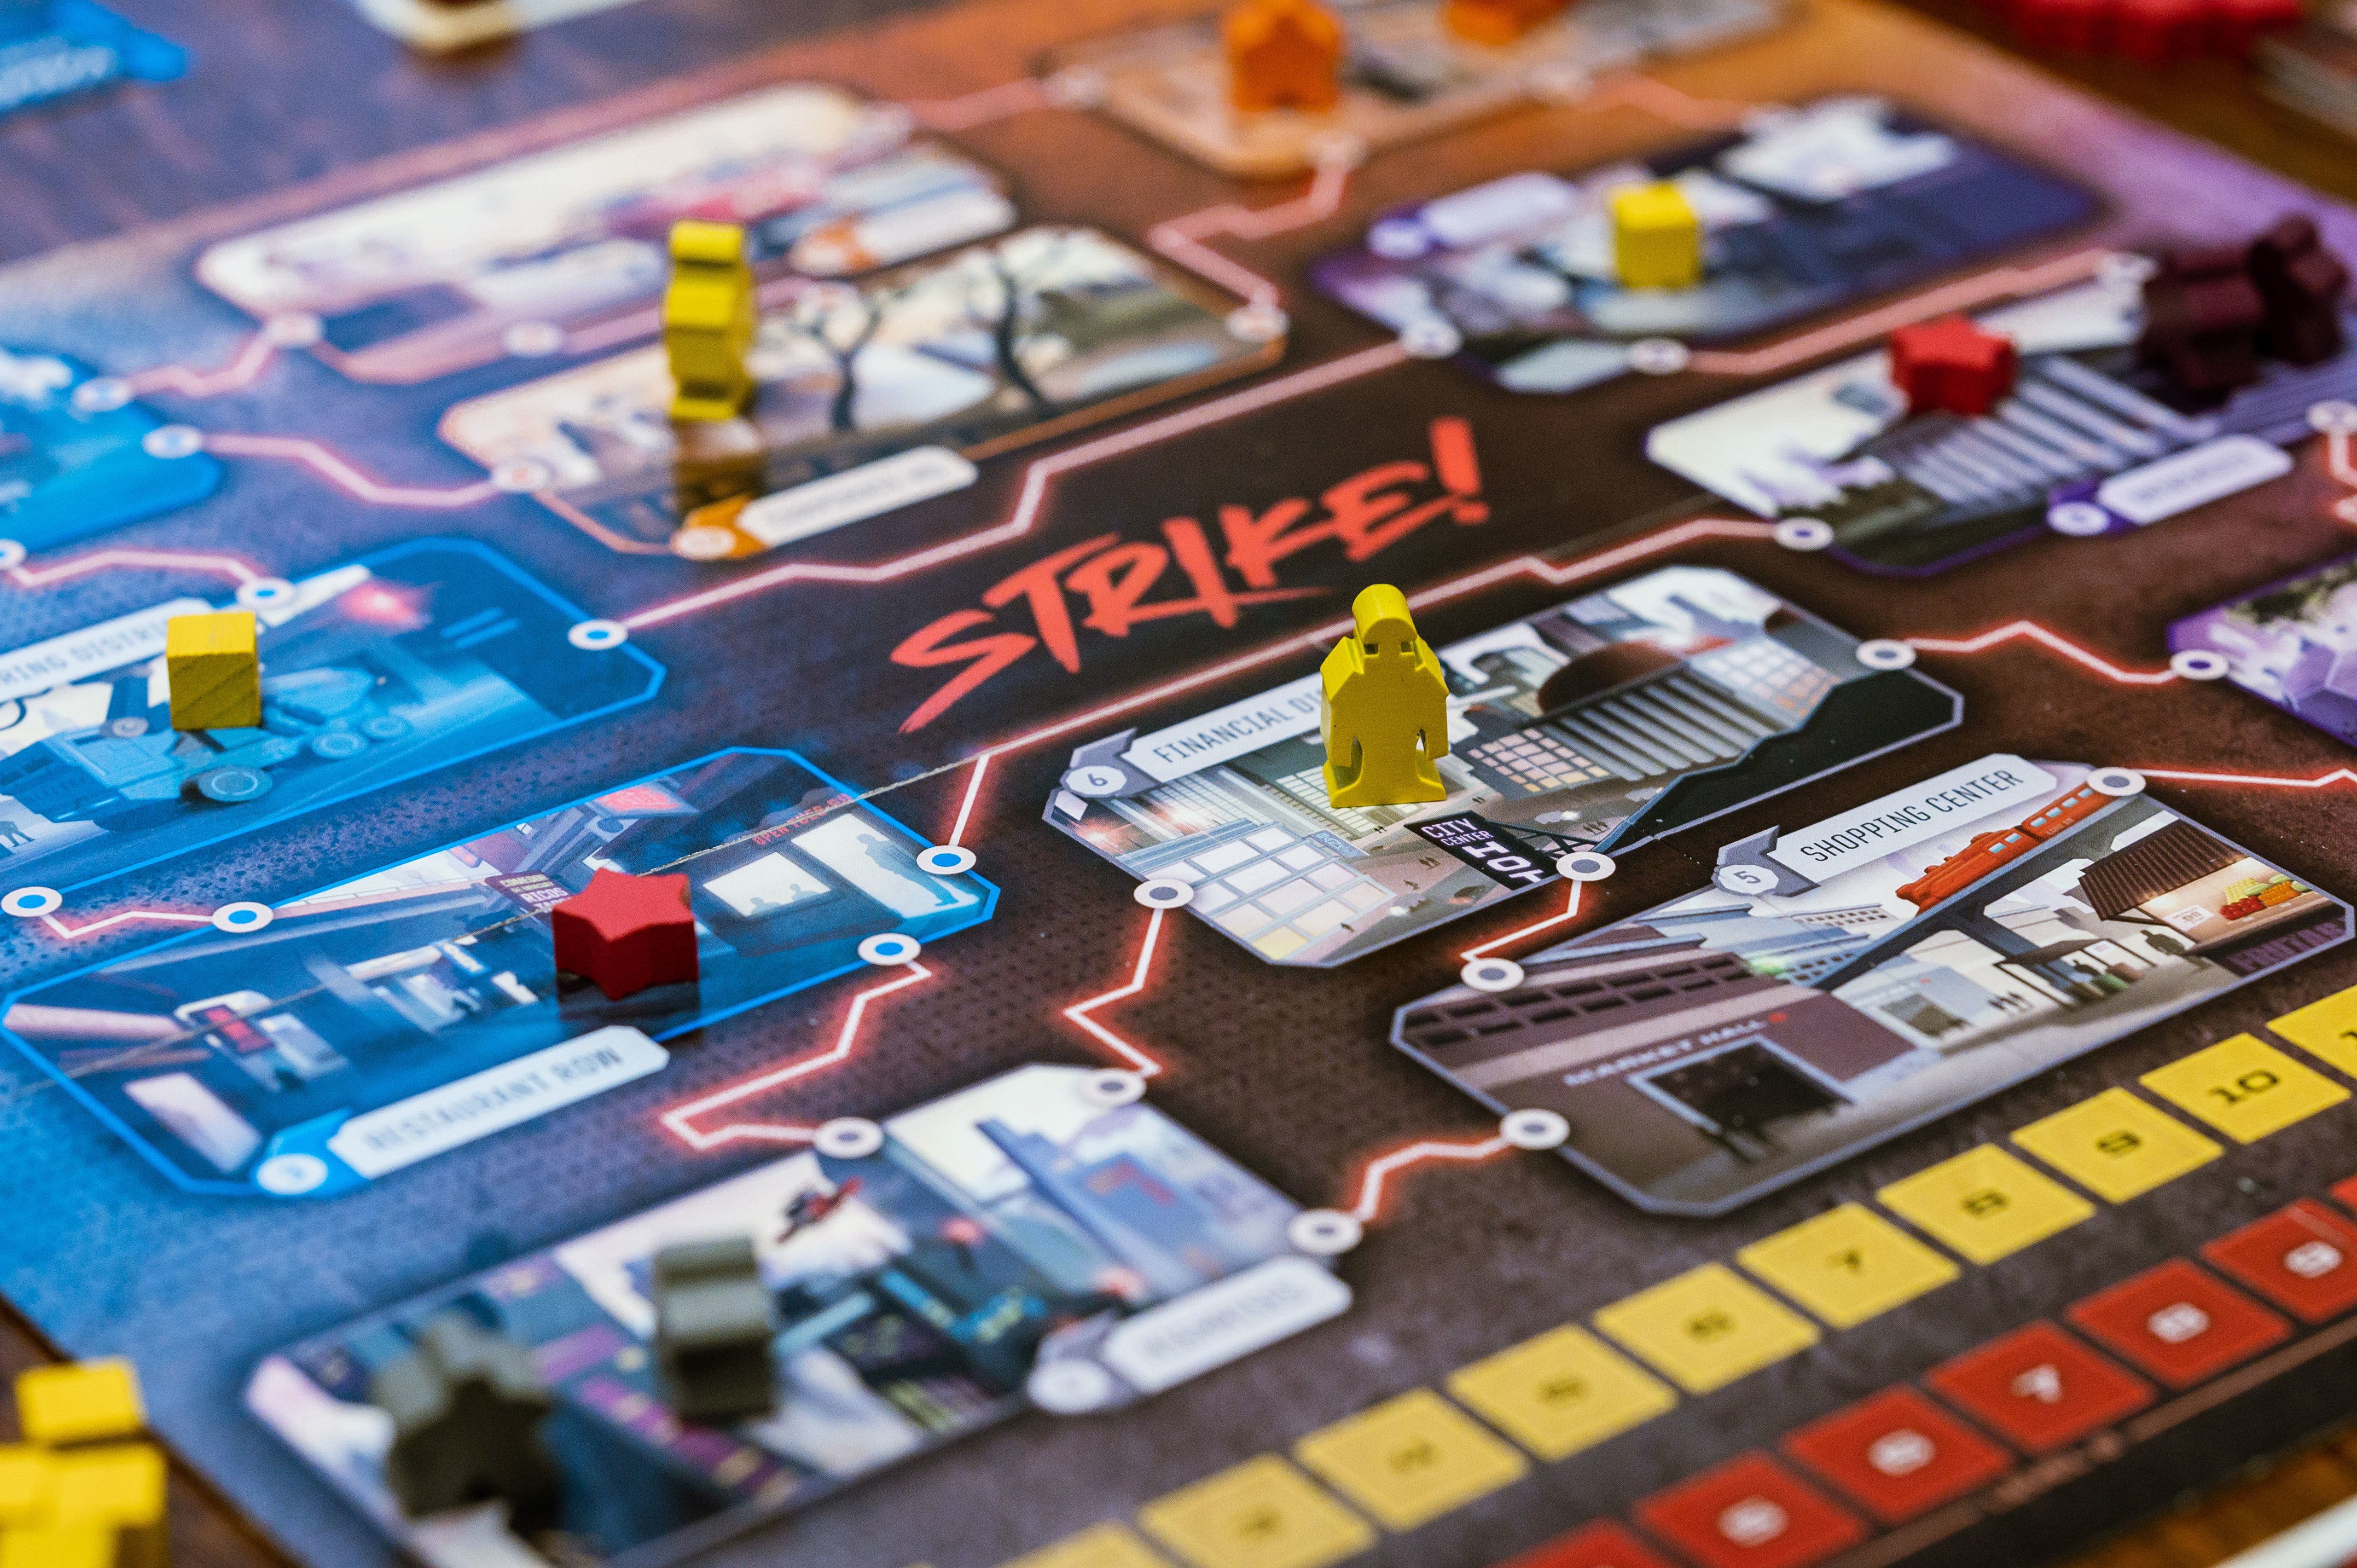 STRIKE! The Game of Worker Rebellion